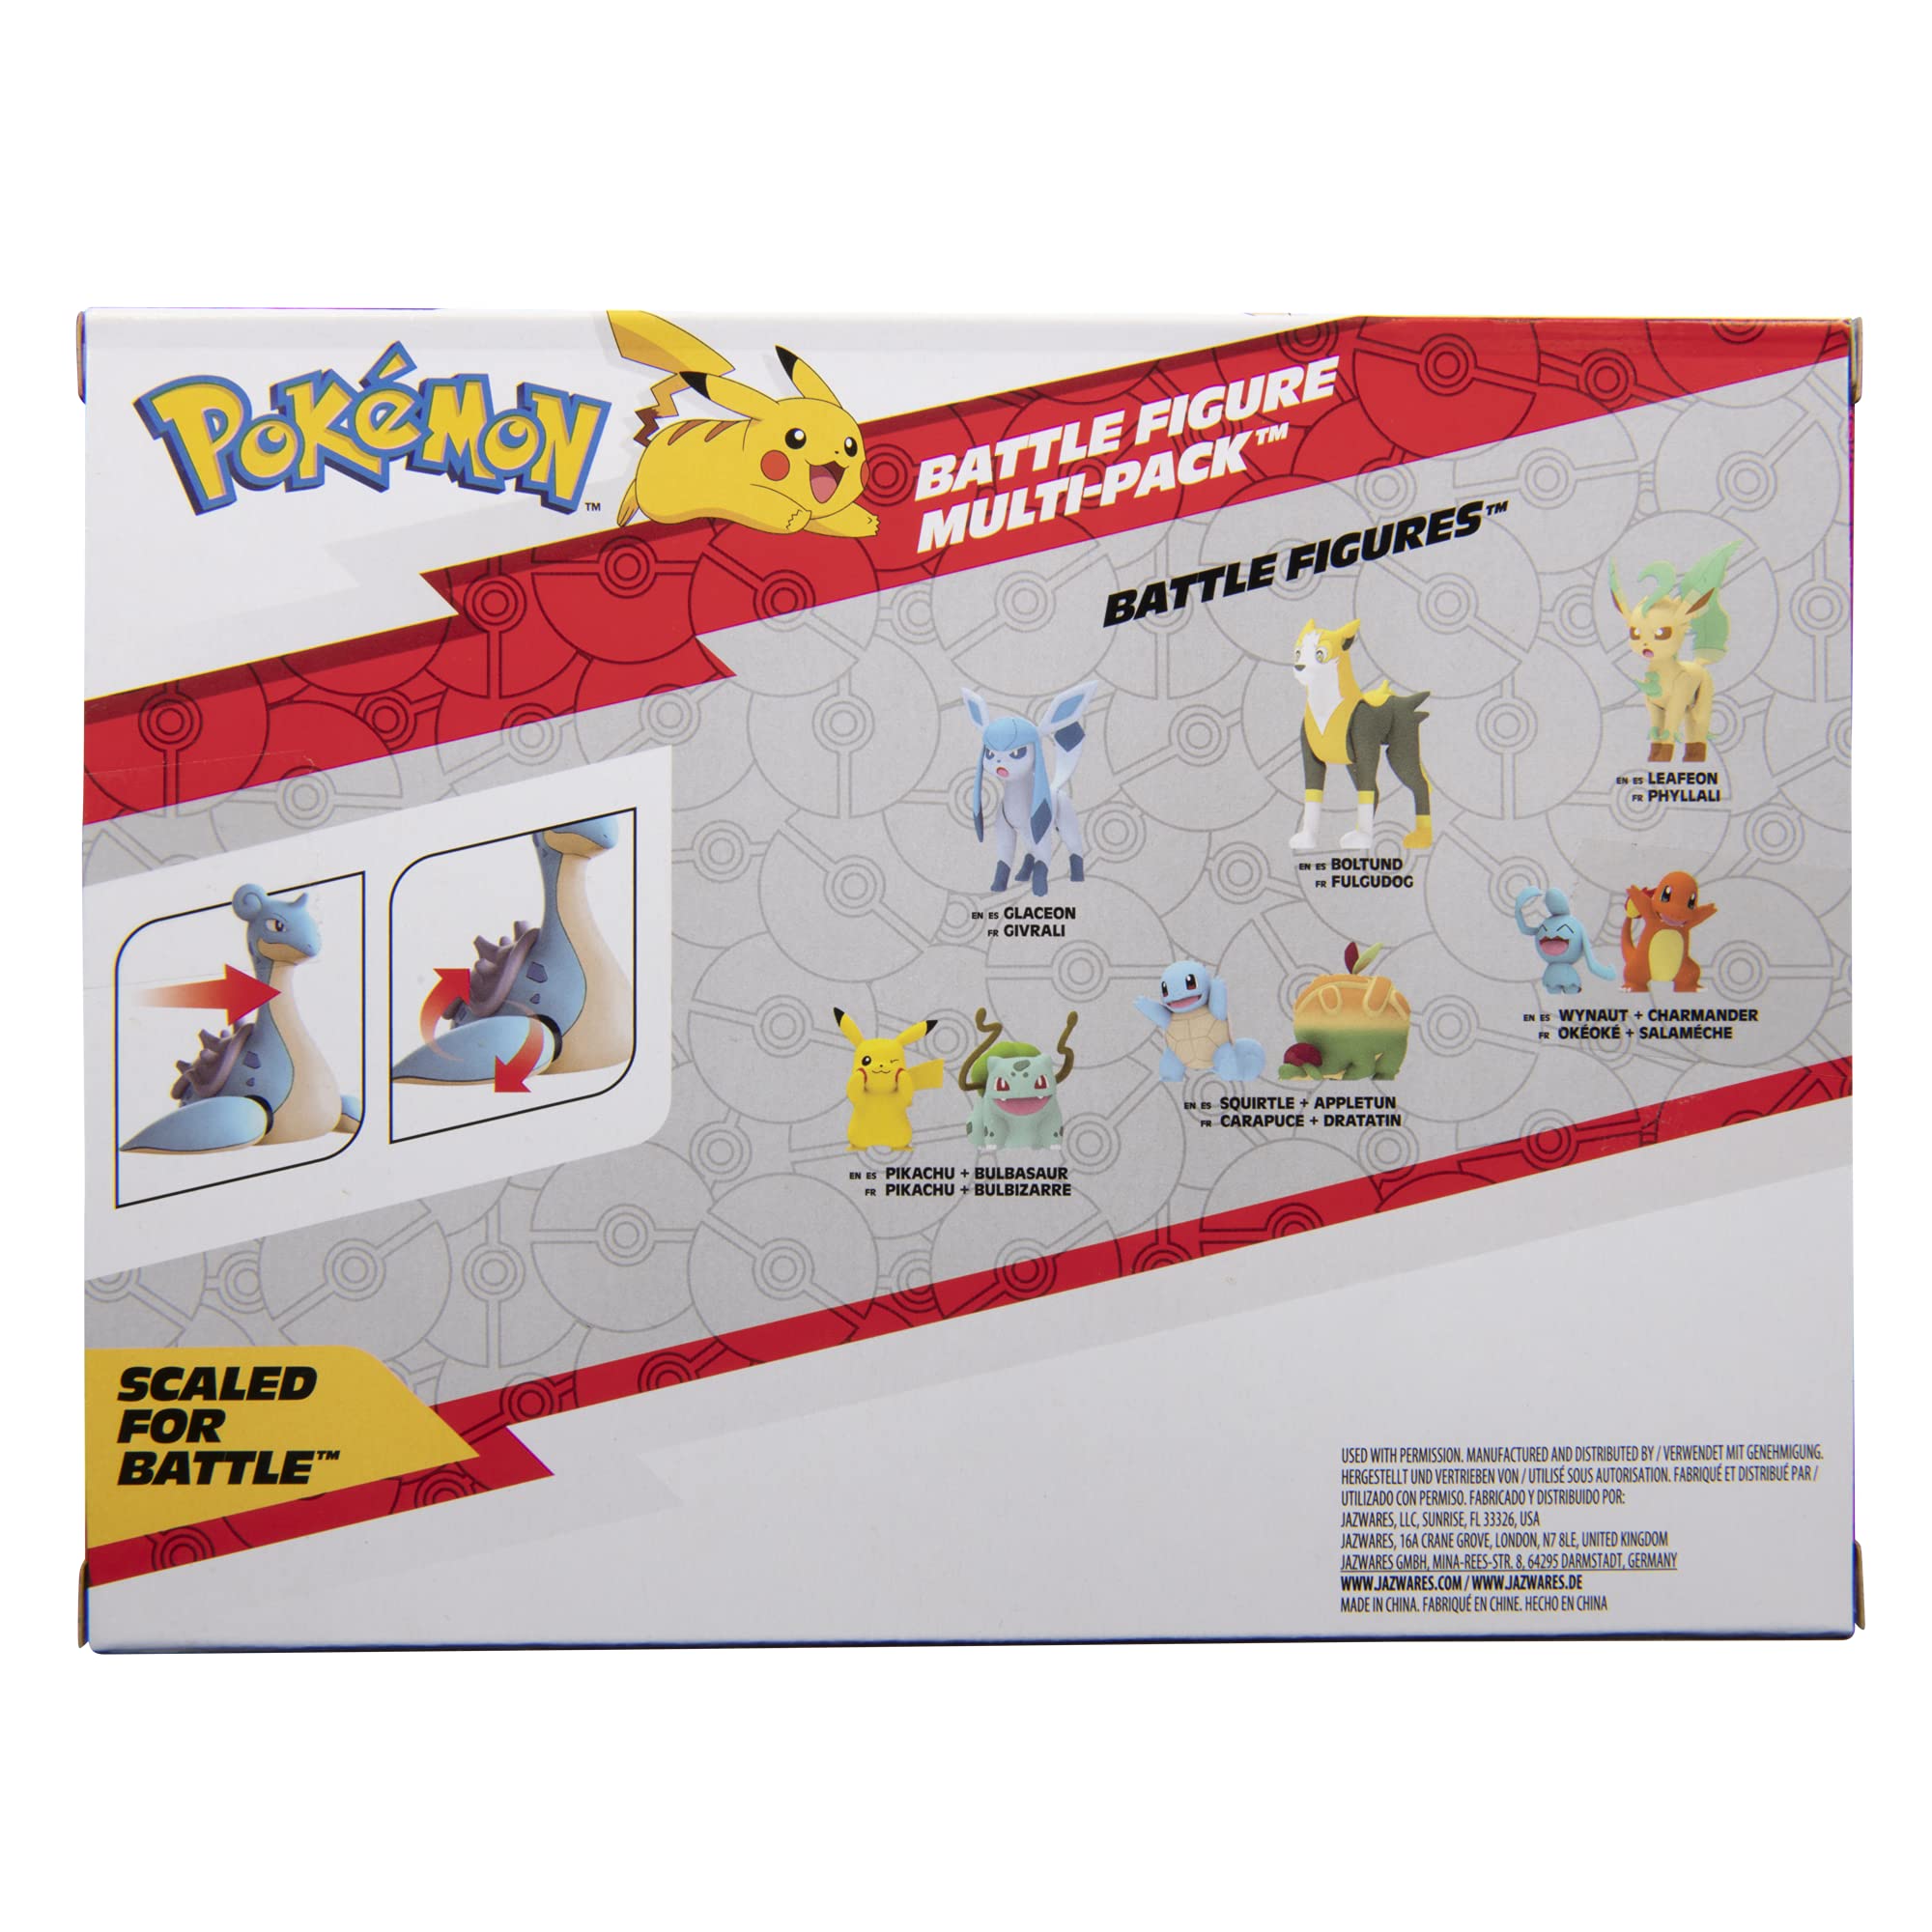 Pokemon Battle Figure, Water-Type Theme 3 Pack with 4.5-inch Froakie, 3-inch Wartortle Figure, 2-inch Froakie - Toys for Kids and Pokémon Fans - Amazon Exclusive